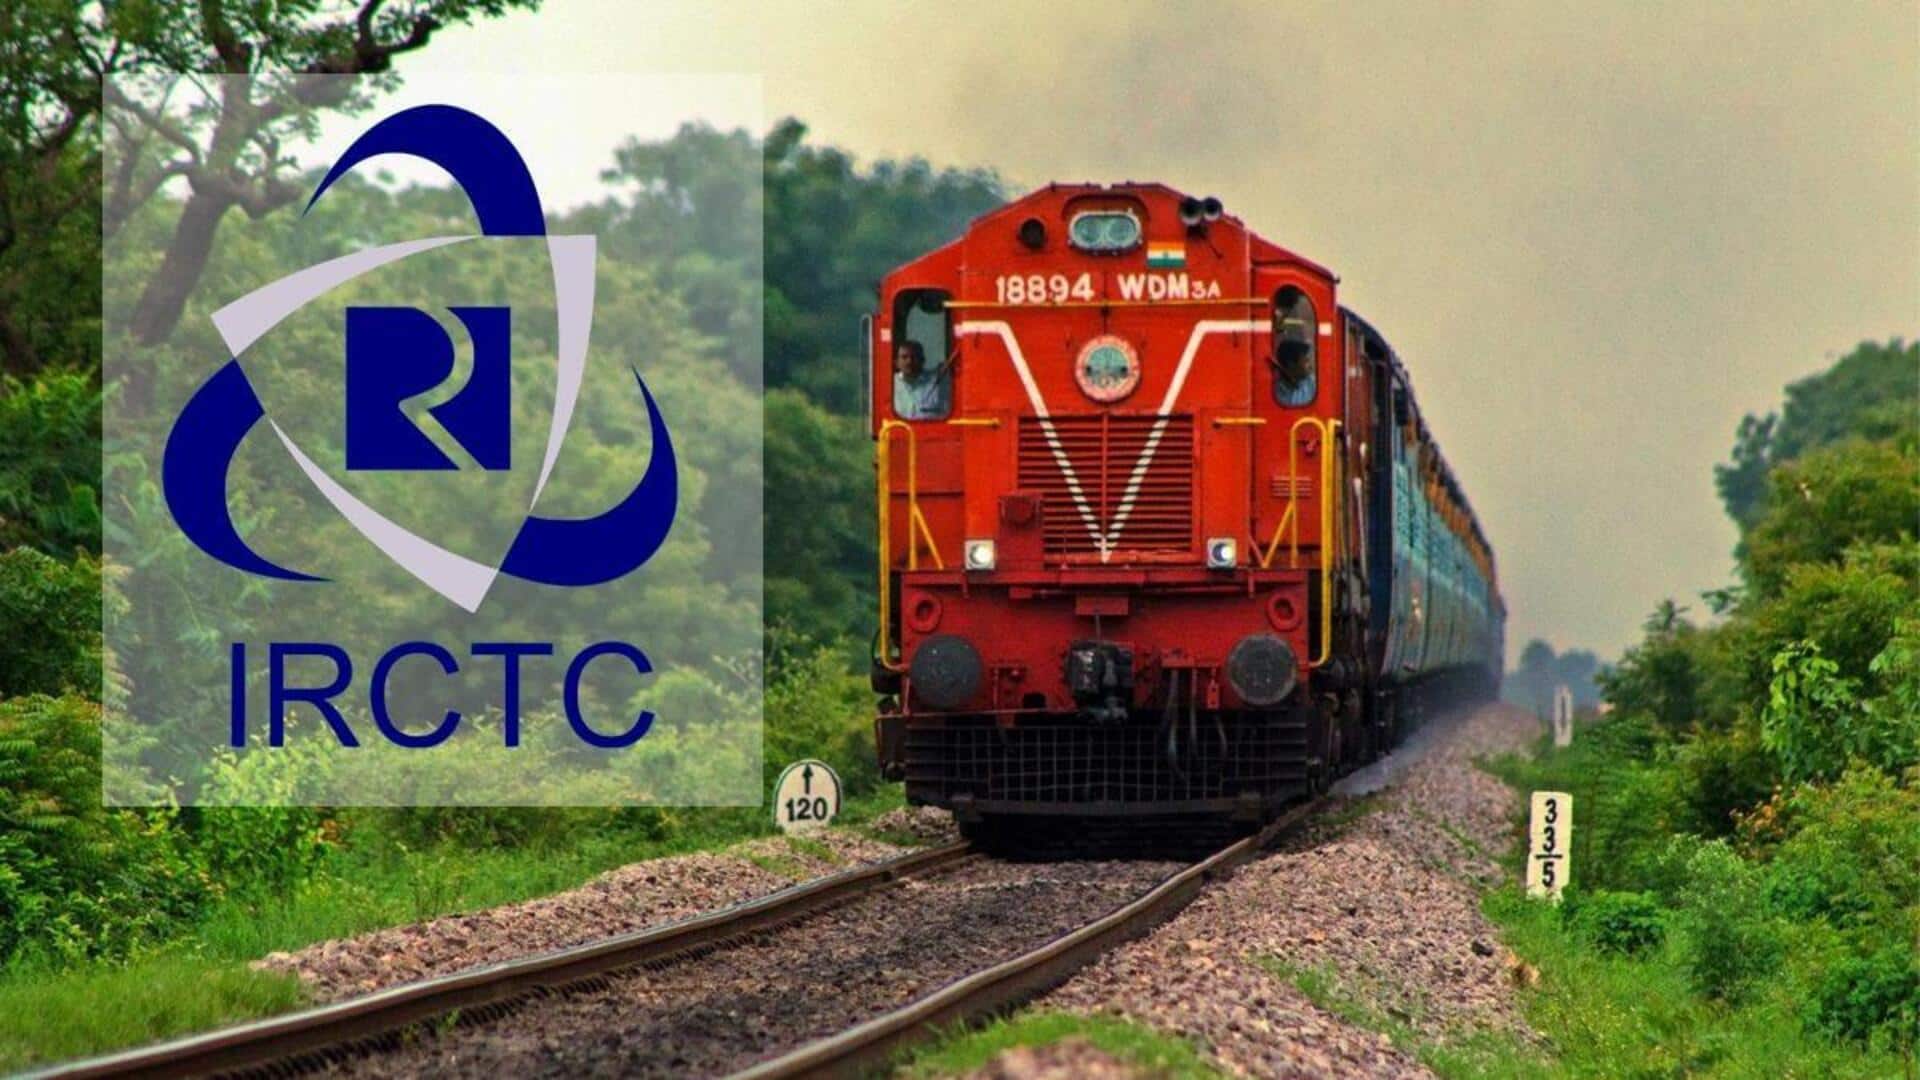 IRCTC shares surge over 13%, hit 52-week high